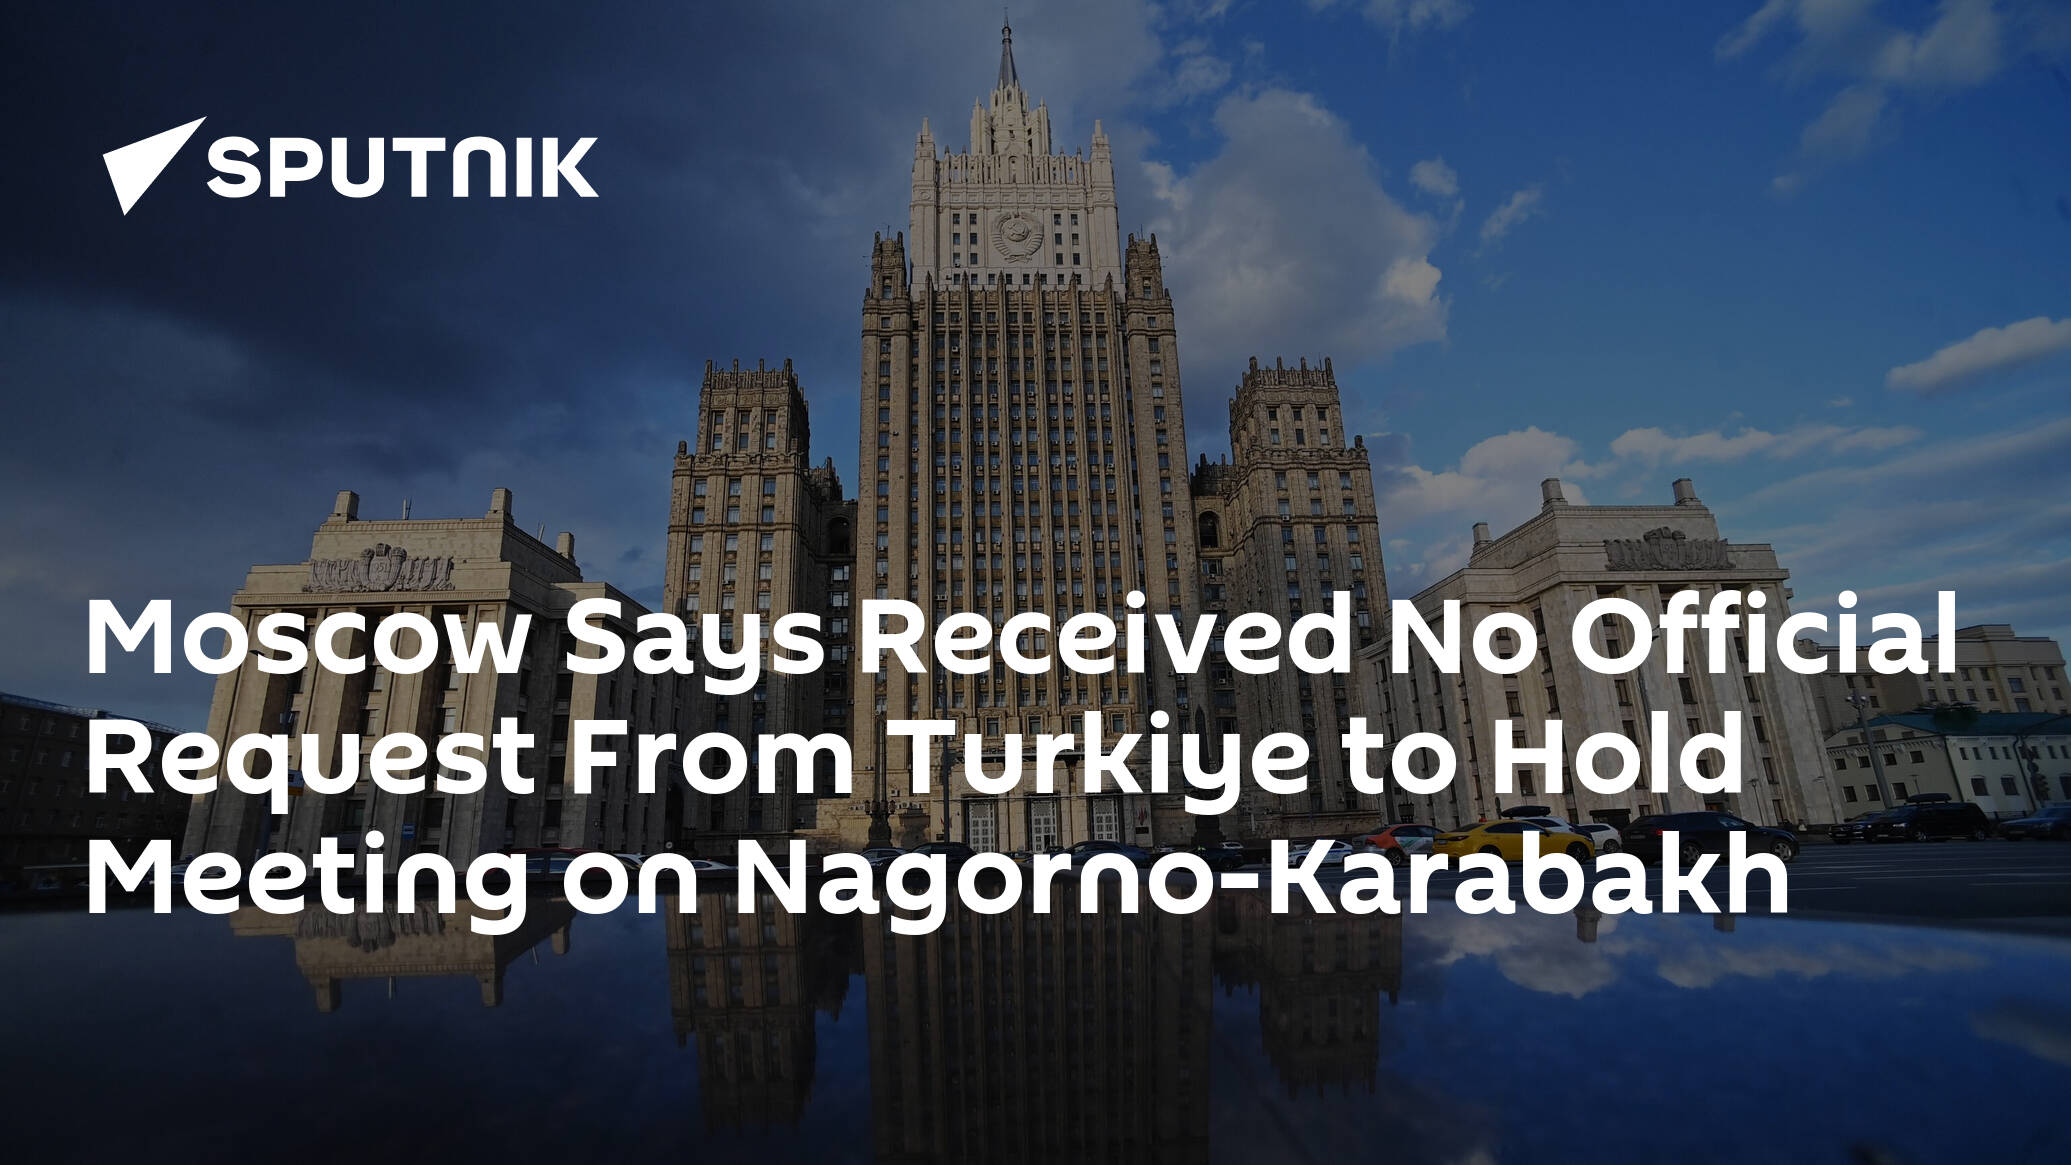 Moscow Says Received No Official Request From Turkiye to Hold Meeting on Nagorno-Karabakh